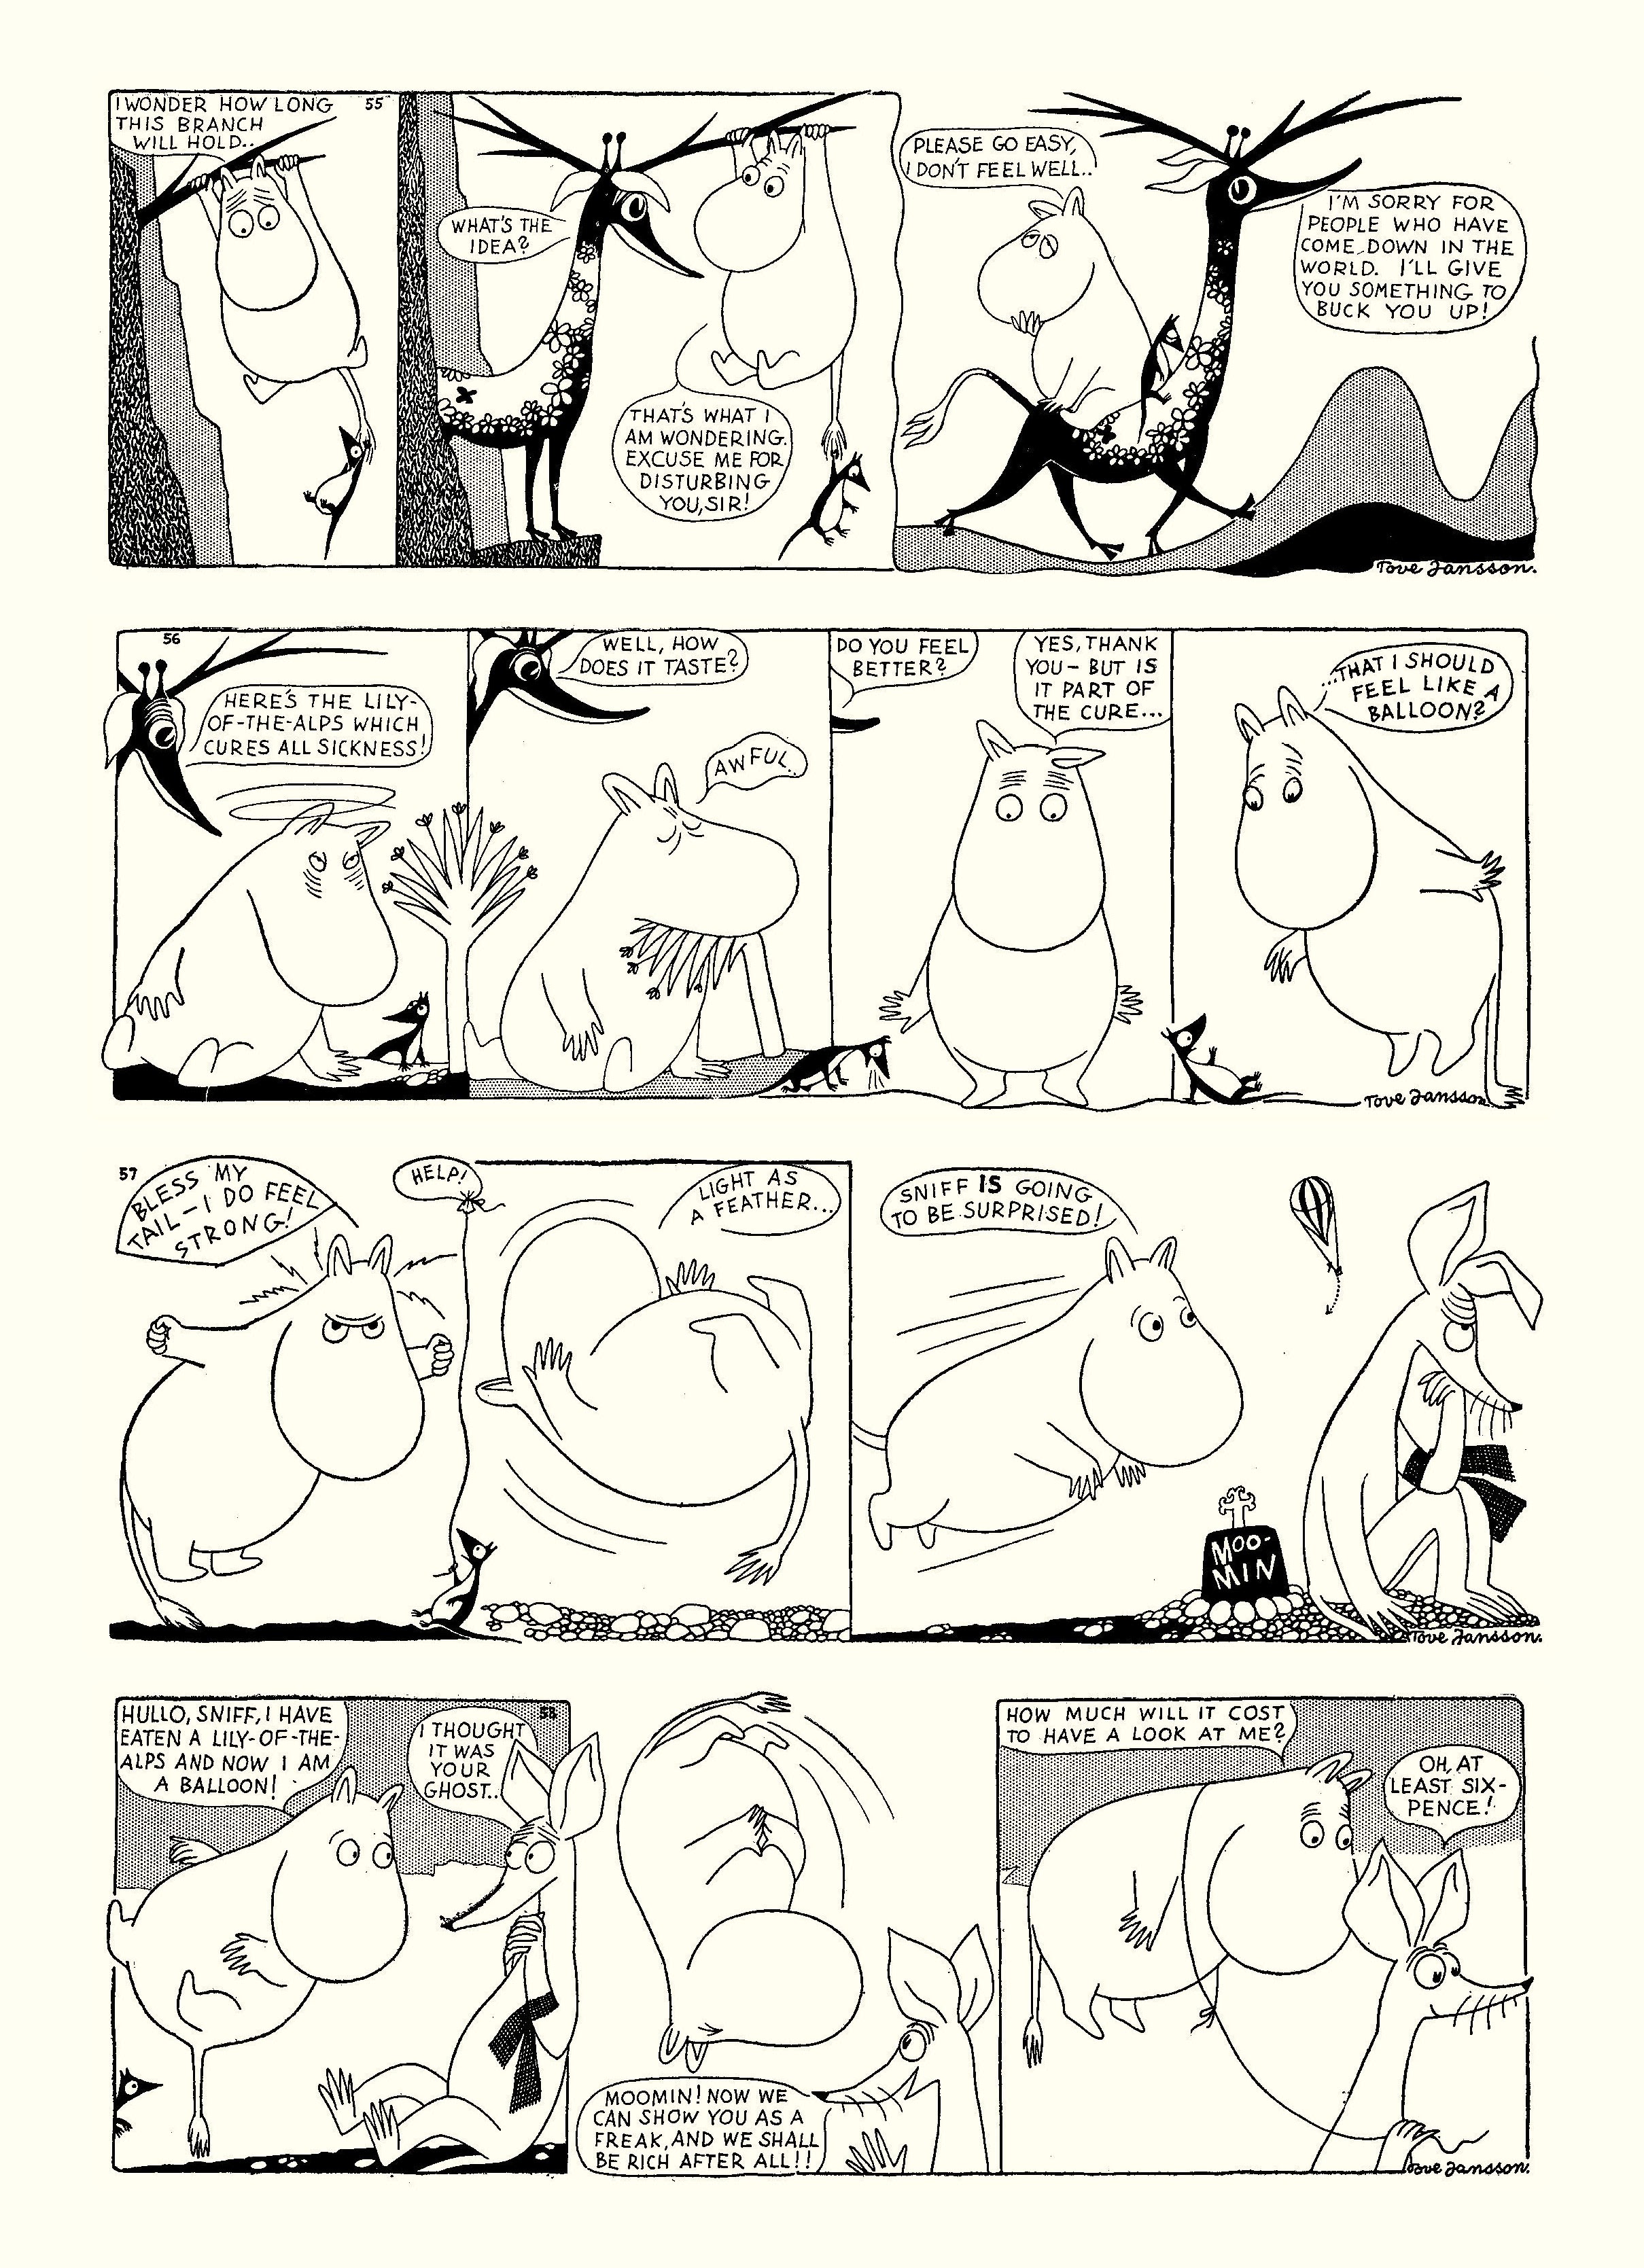 Read online Moomin: The Complete Tove Jansson Comic Strip comic -  Issue # TPB 1 - 20